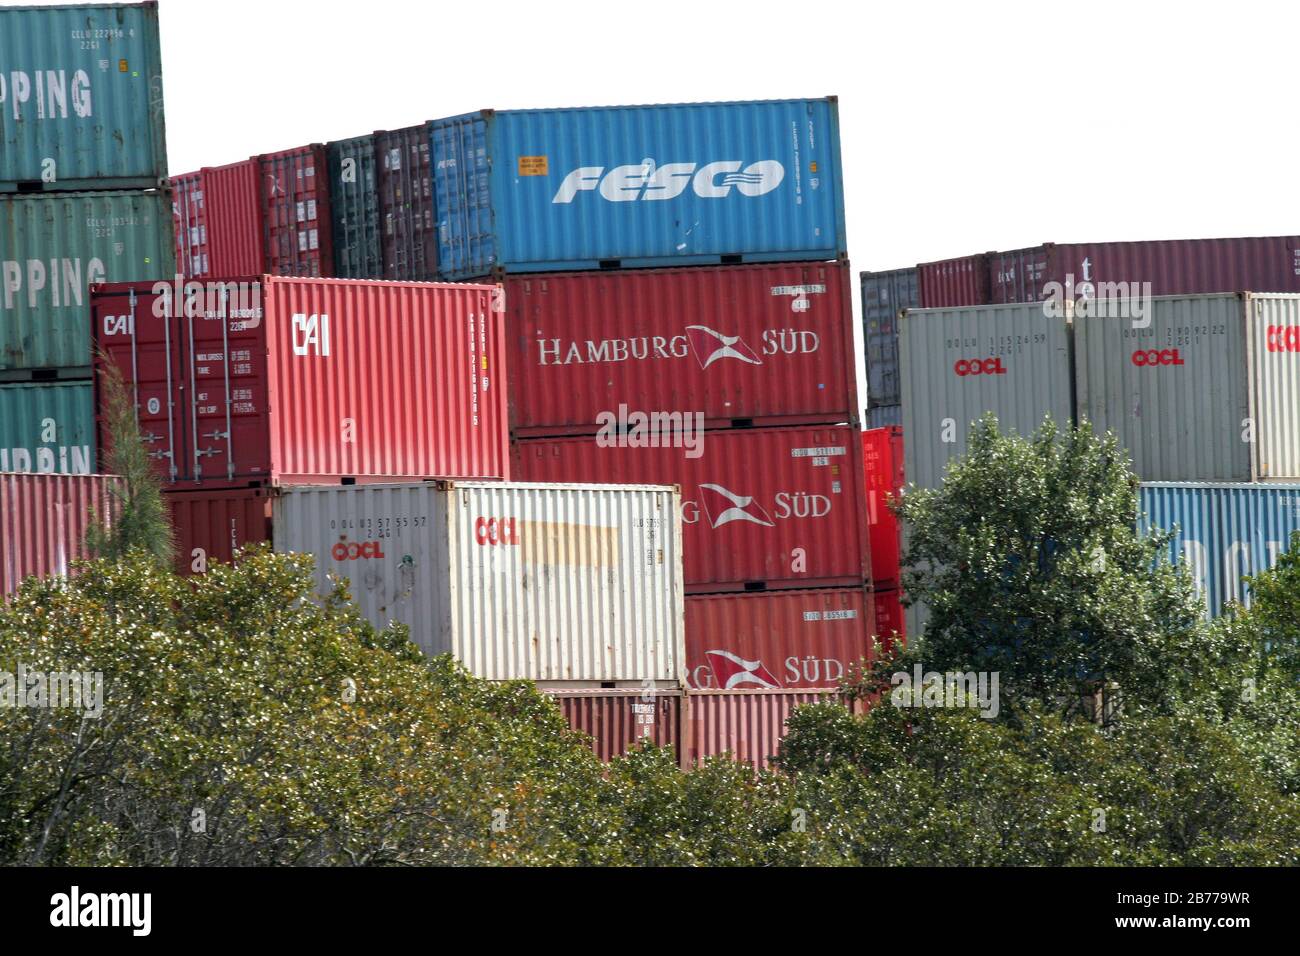 Shipping containers, Port Botany, Sydney, New South Wales, Australia. Stock Photo